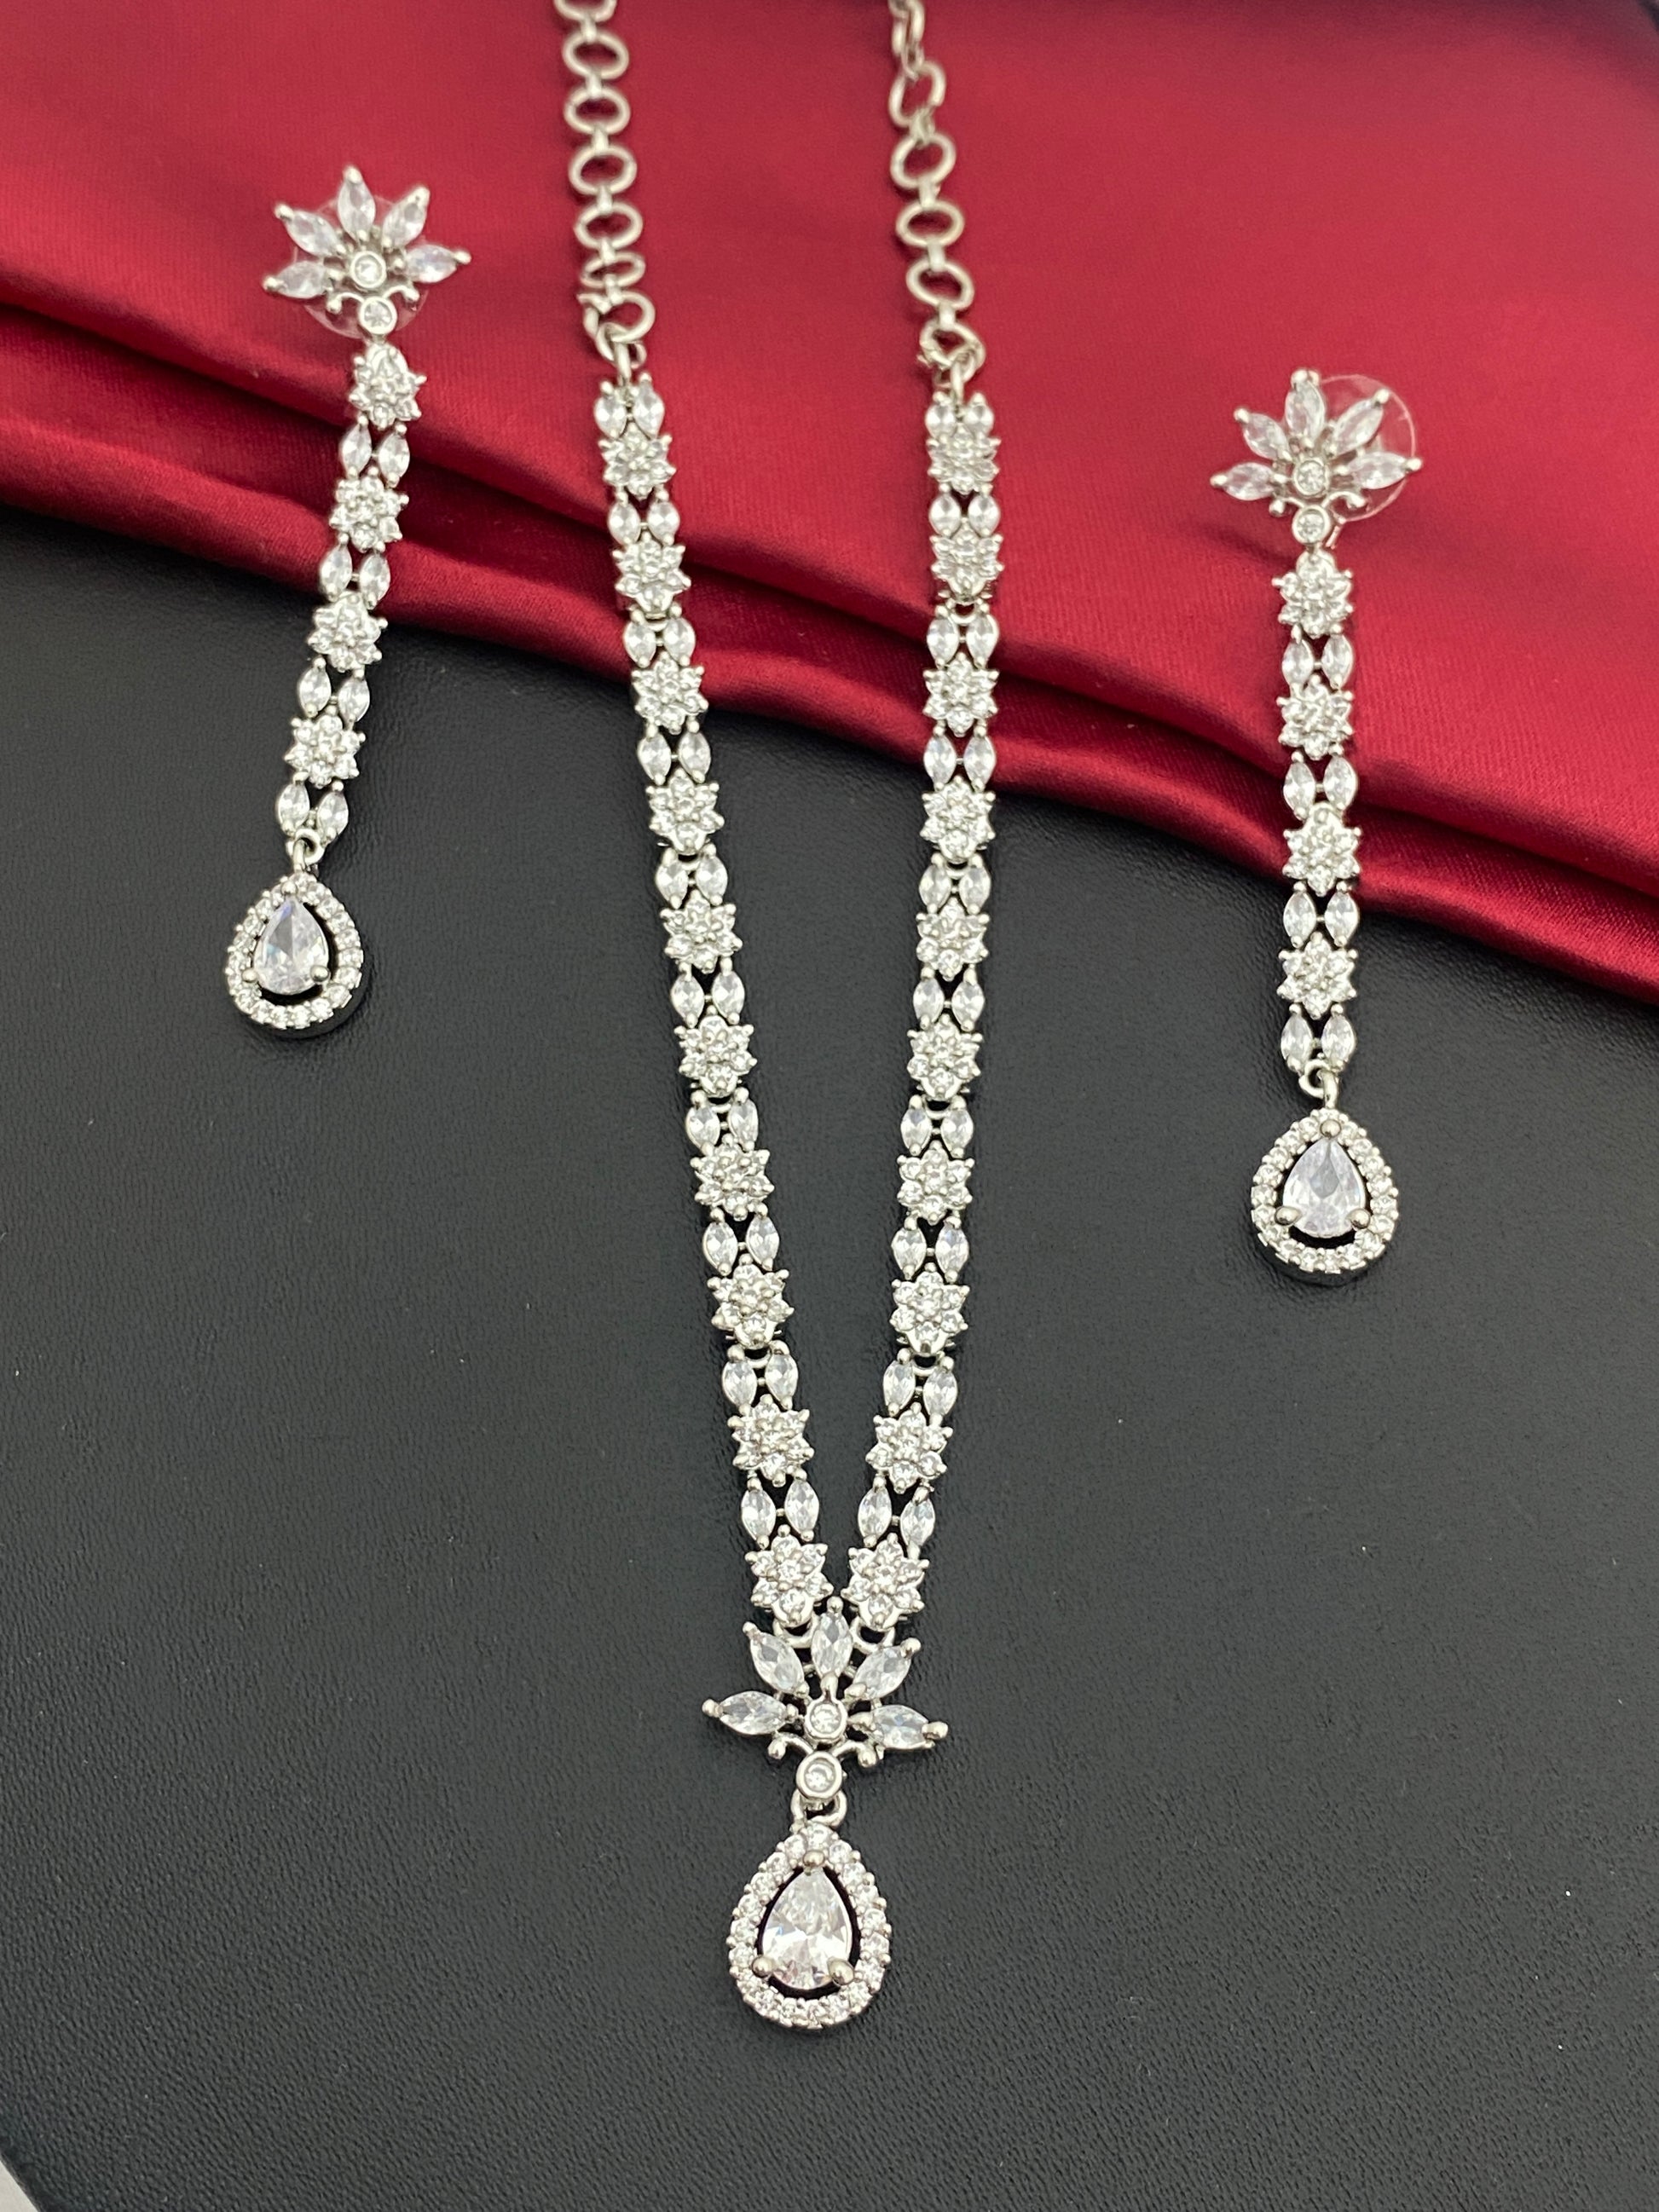 Lovely American Diamond Necklace And Long Dangle Earrings With White Stones